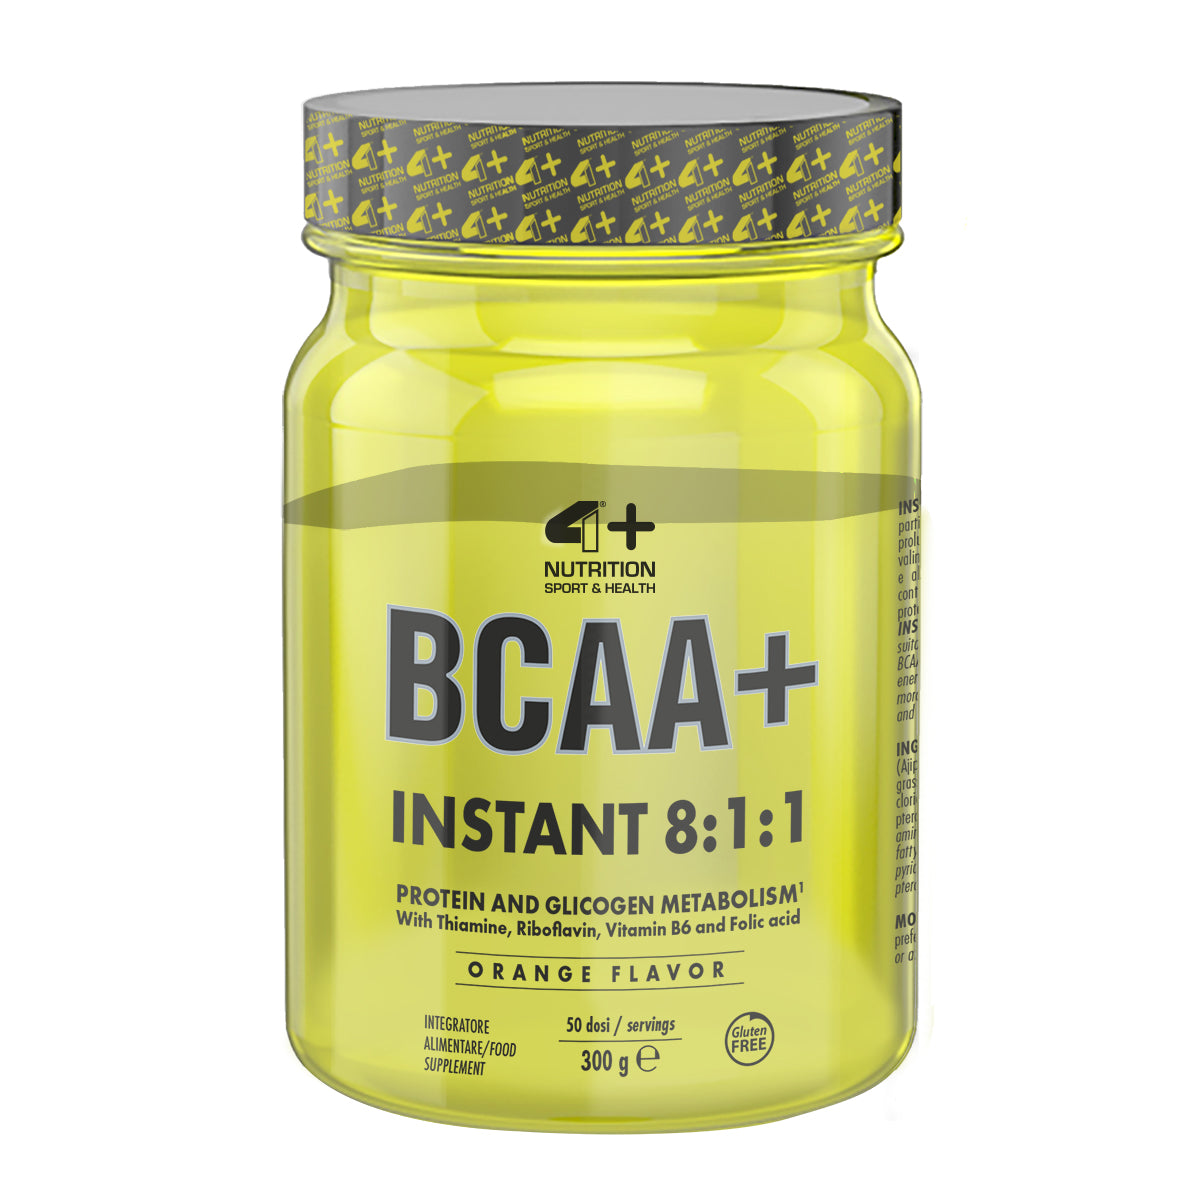 INSTANT XTREME BCAA+